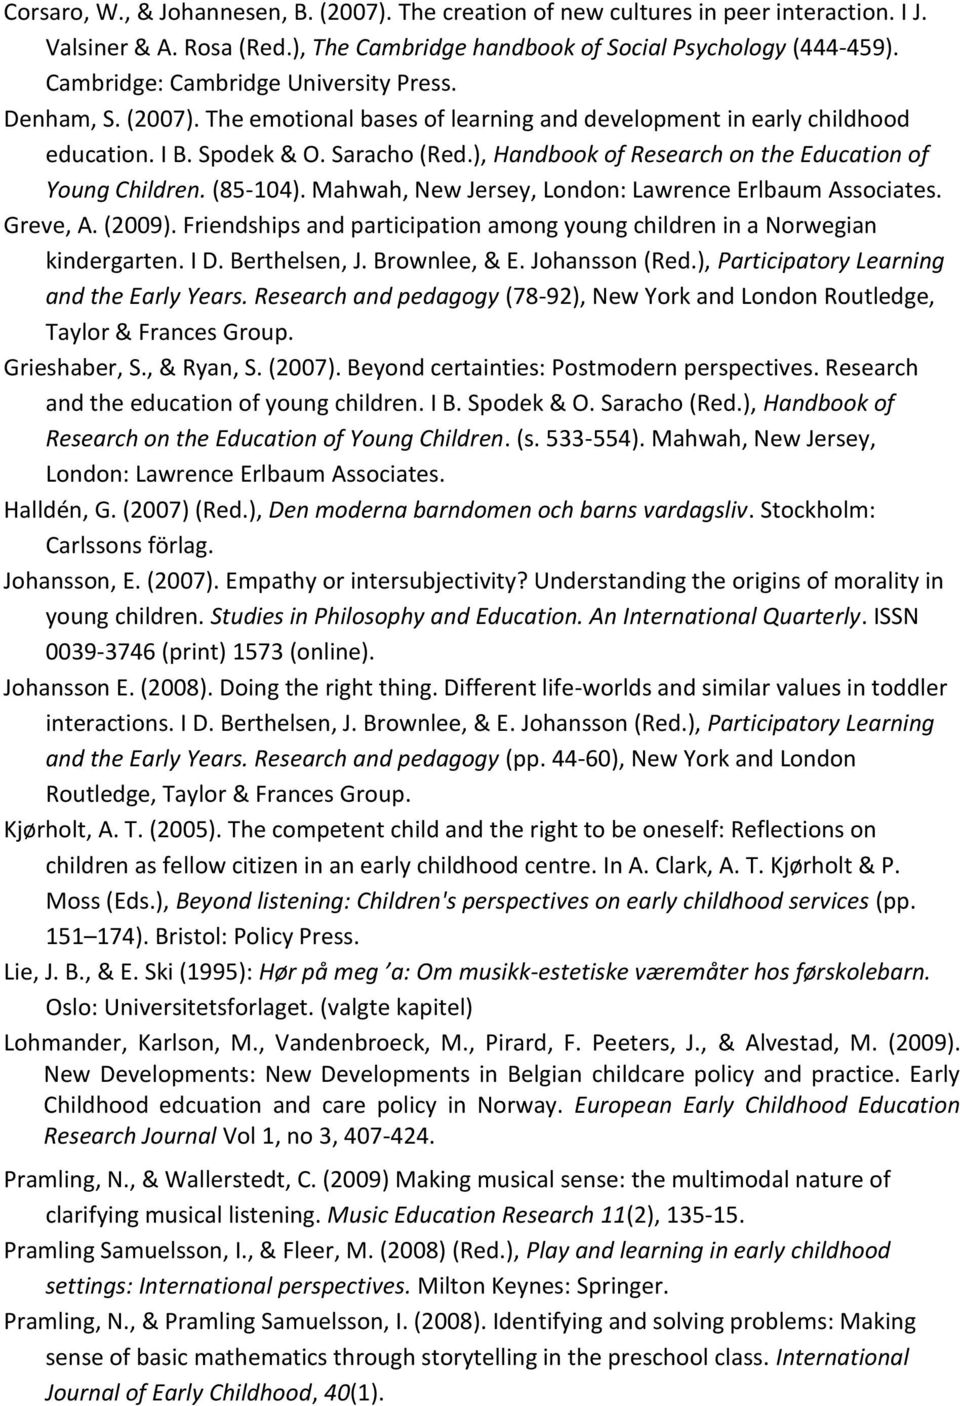 ), Handbook of Research on the Education of Young Children. (85-104). Mahwah, New Jersey, London: Lawrence Erlbaum Associates. Greve, A. (2009).